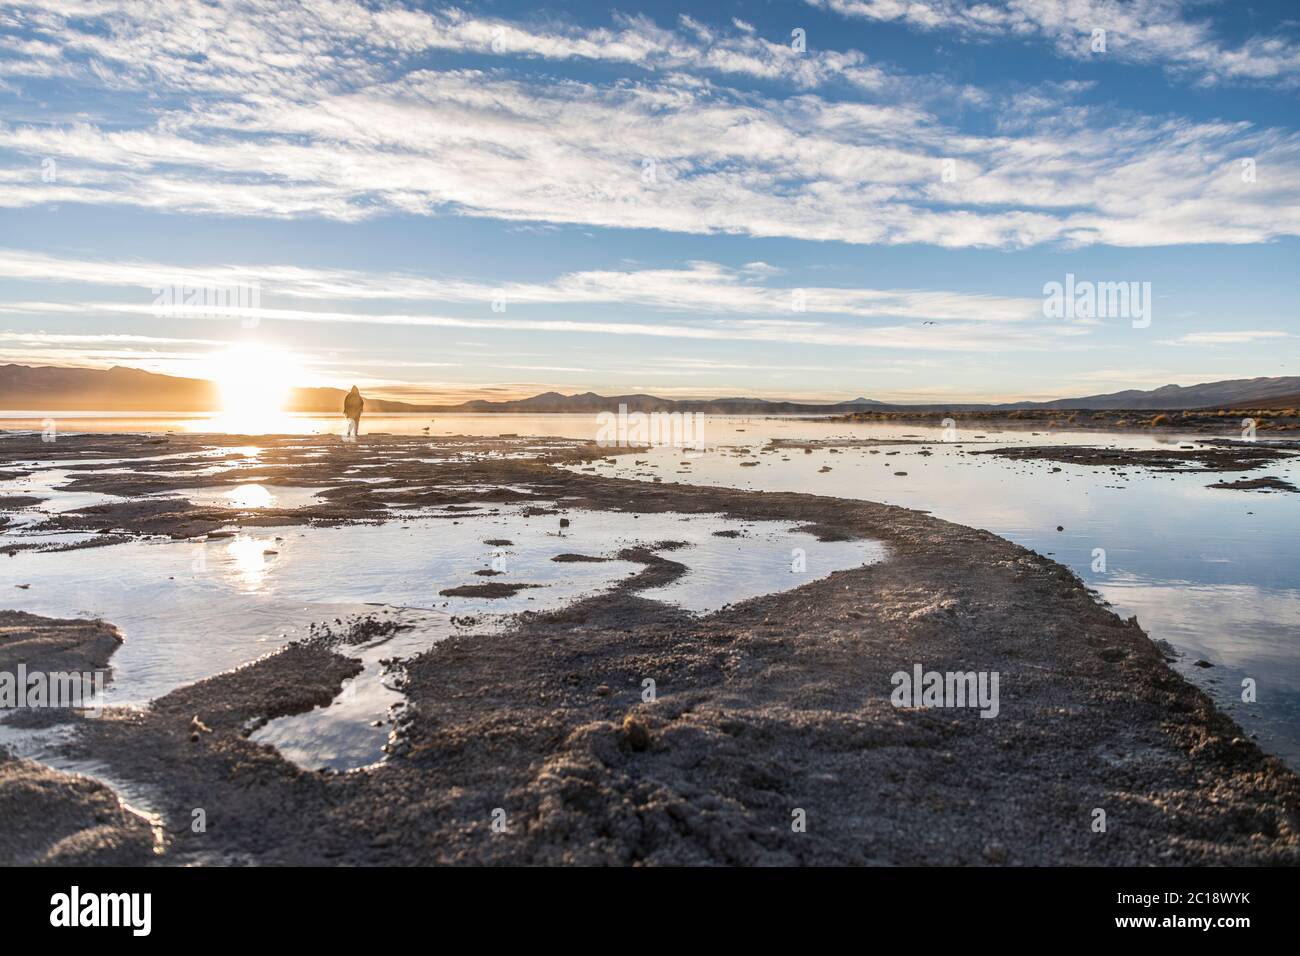 nice landscape in a frozen lake with a blue sky and the sun rising in the horizon Stock Photo